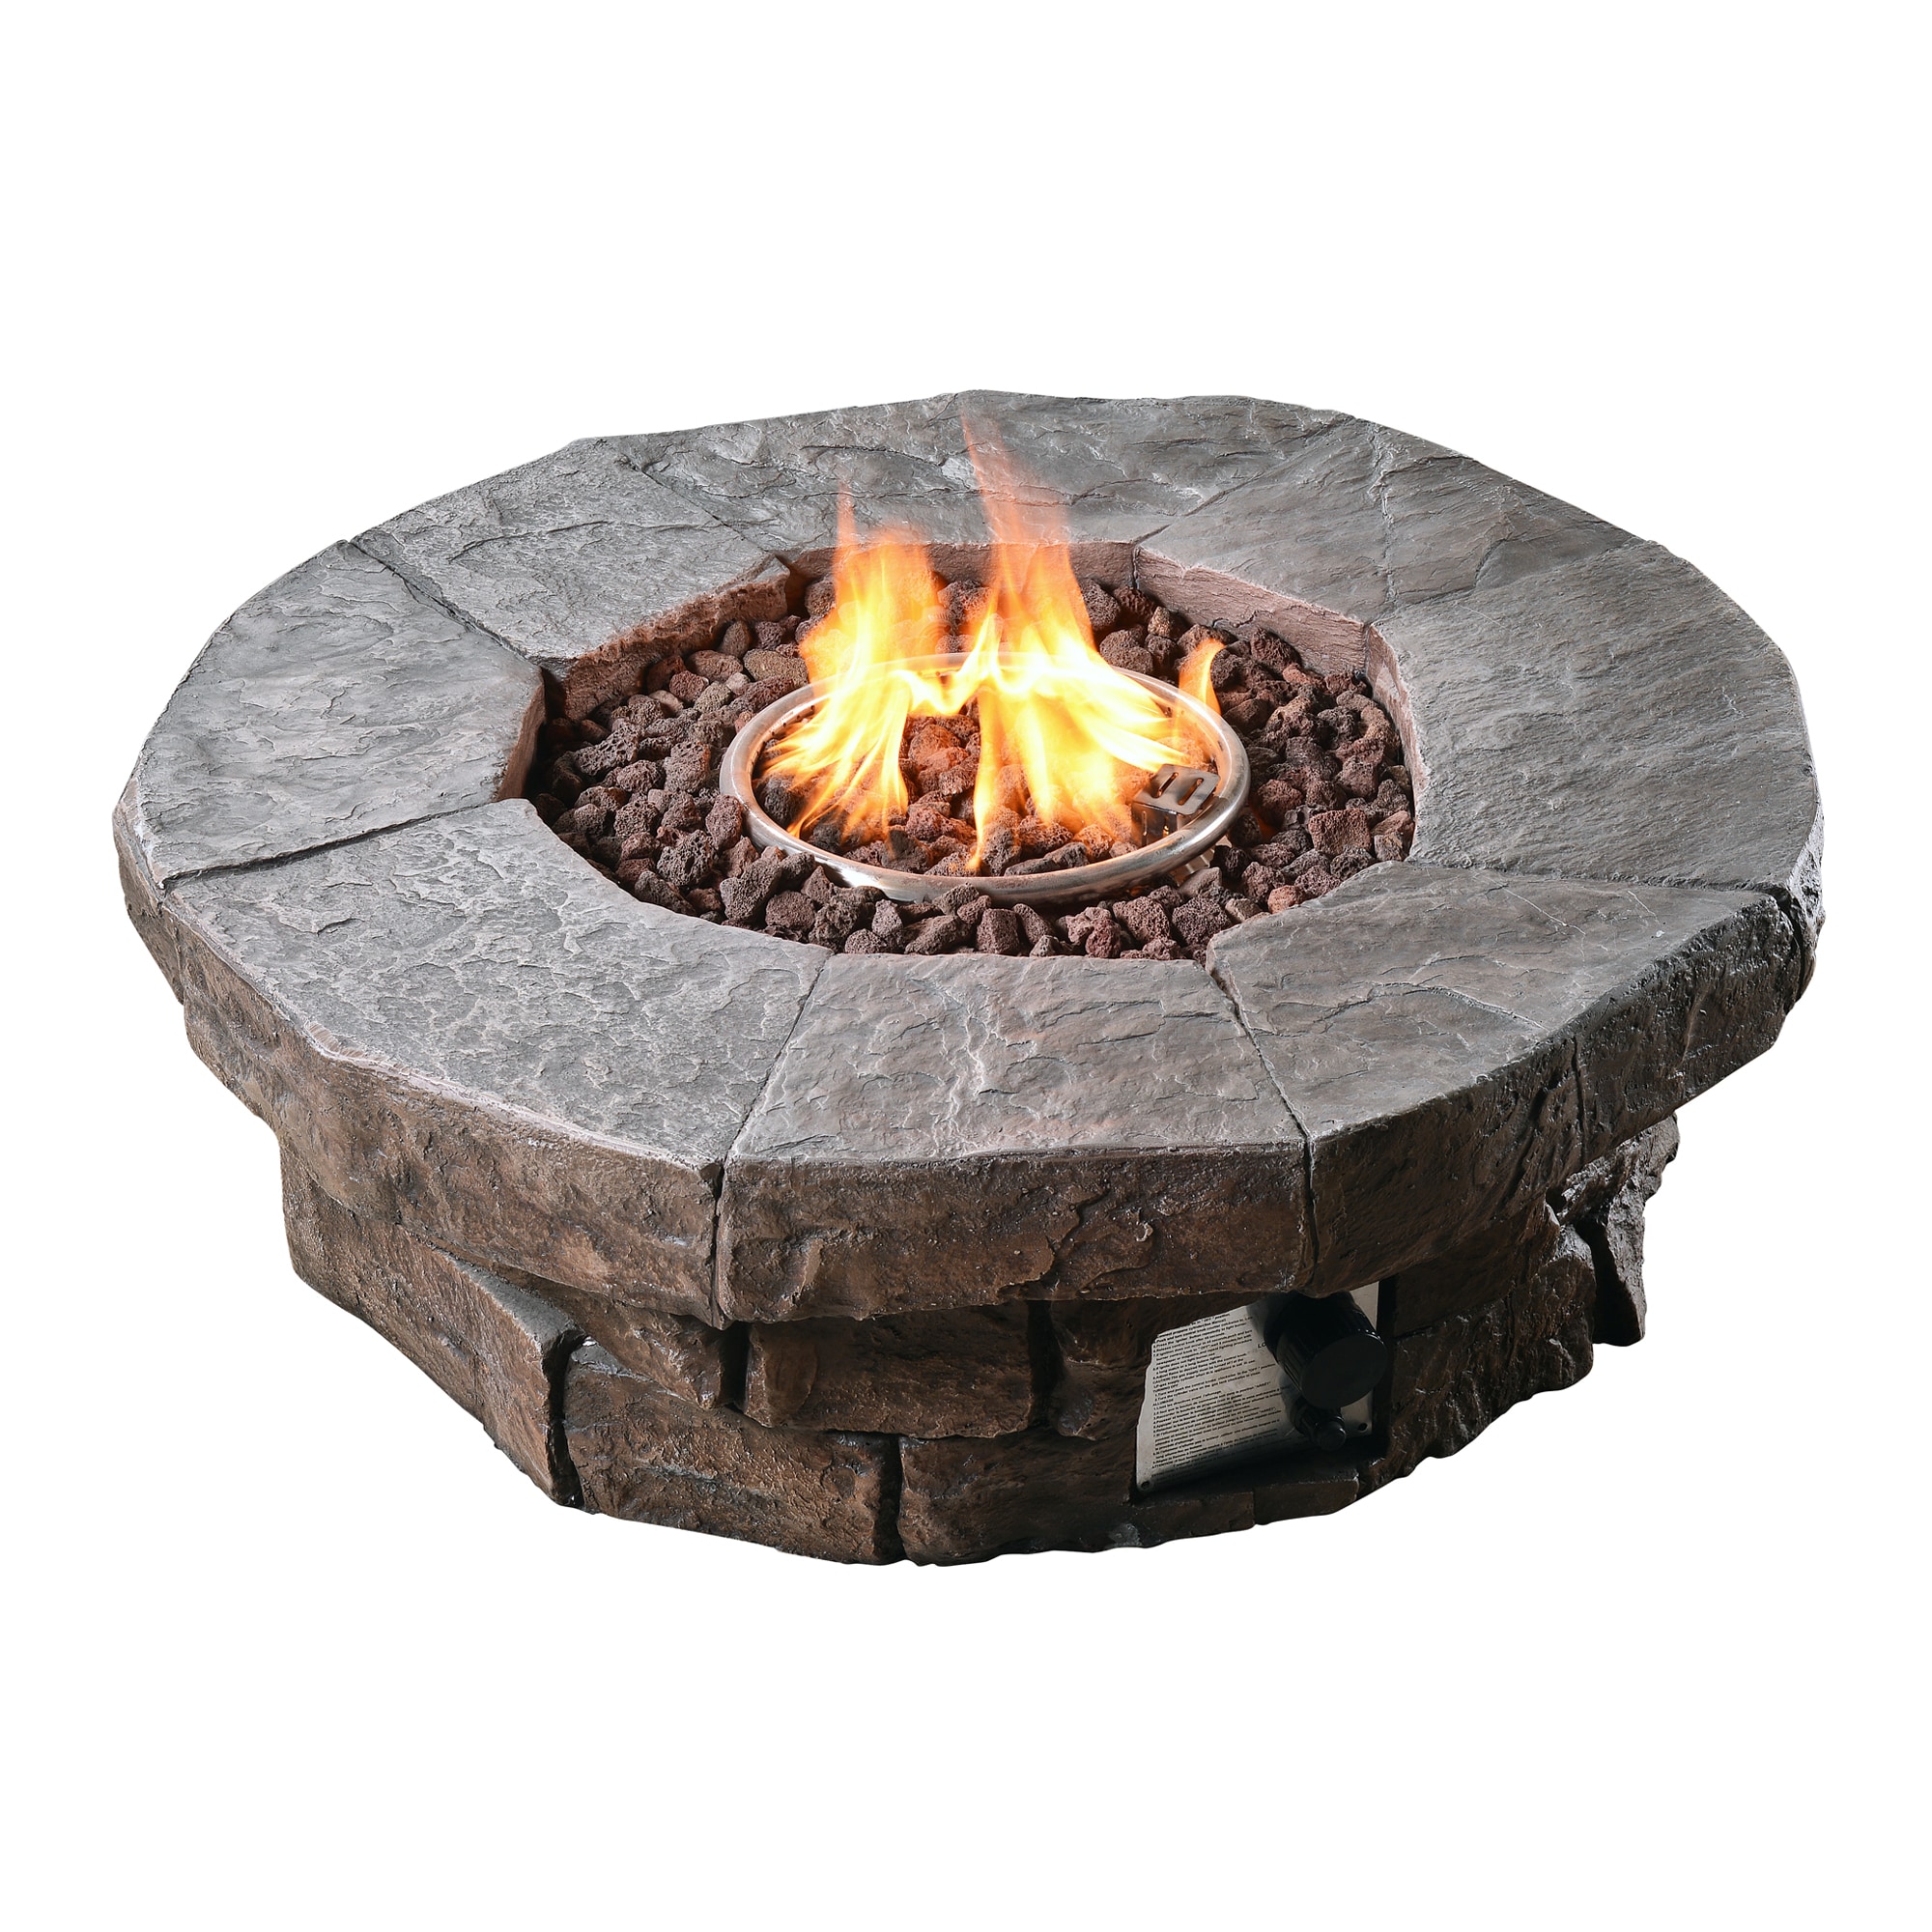 Teamson Propane Fire Pits 37 01 In W, Flammable Rocks For Fire Pit